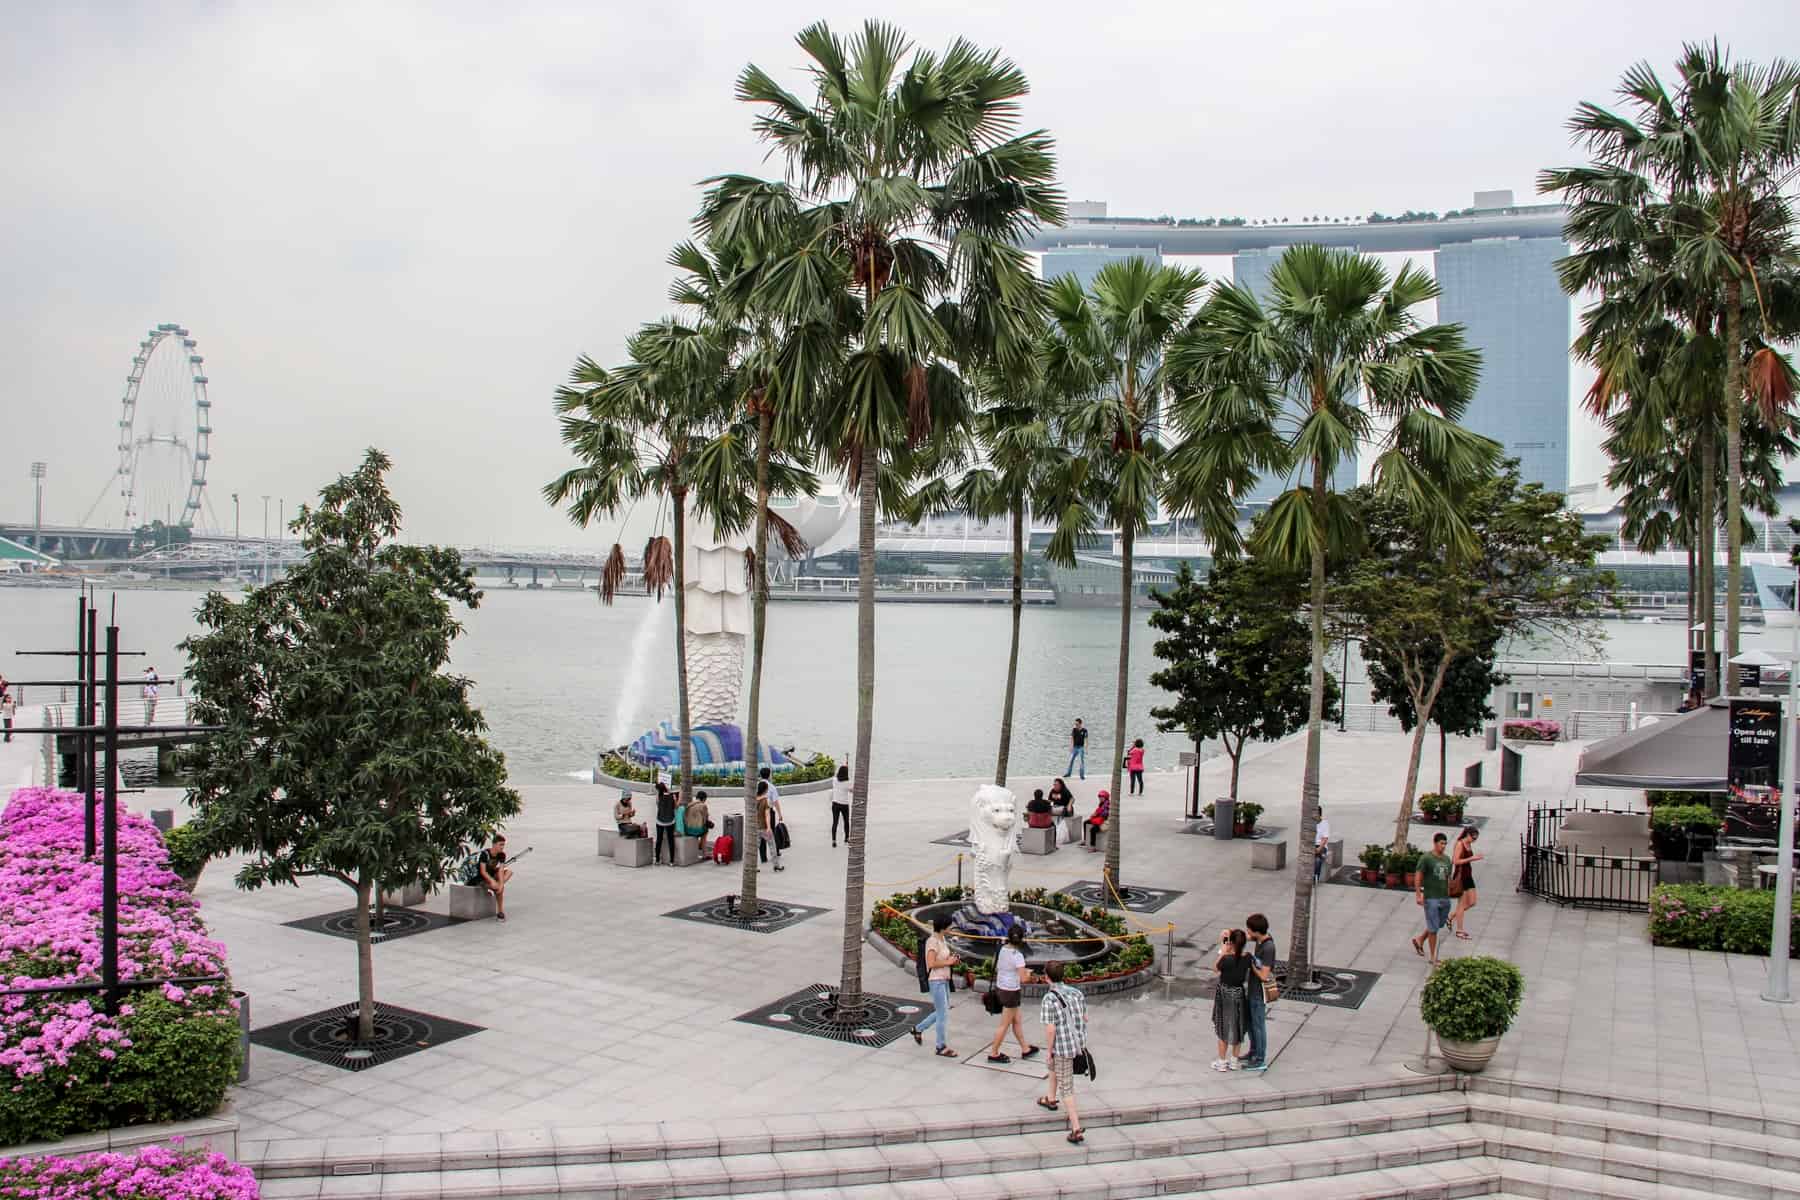 A waterside public park with green trees, pink flower bushes and the Merlion water fountain in Singapore looking out towards a ferris wheel and the boat shaped Marina Bays Sands hotel in the distance